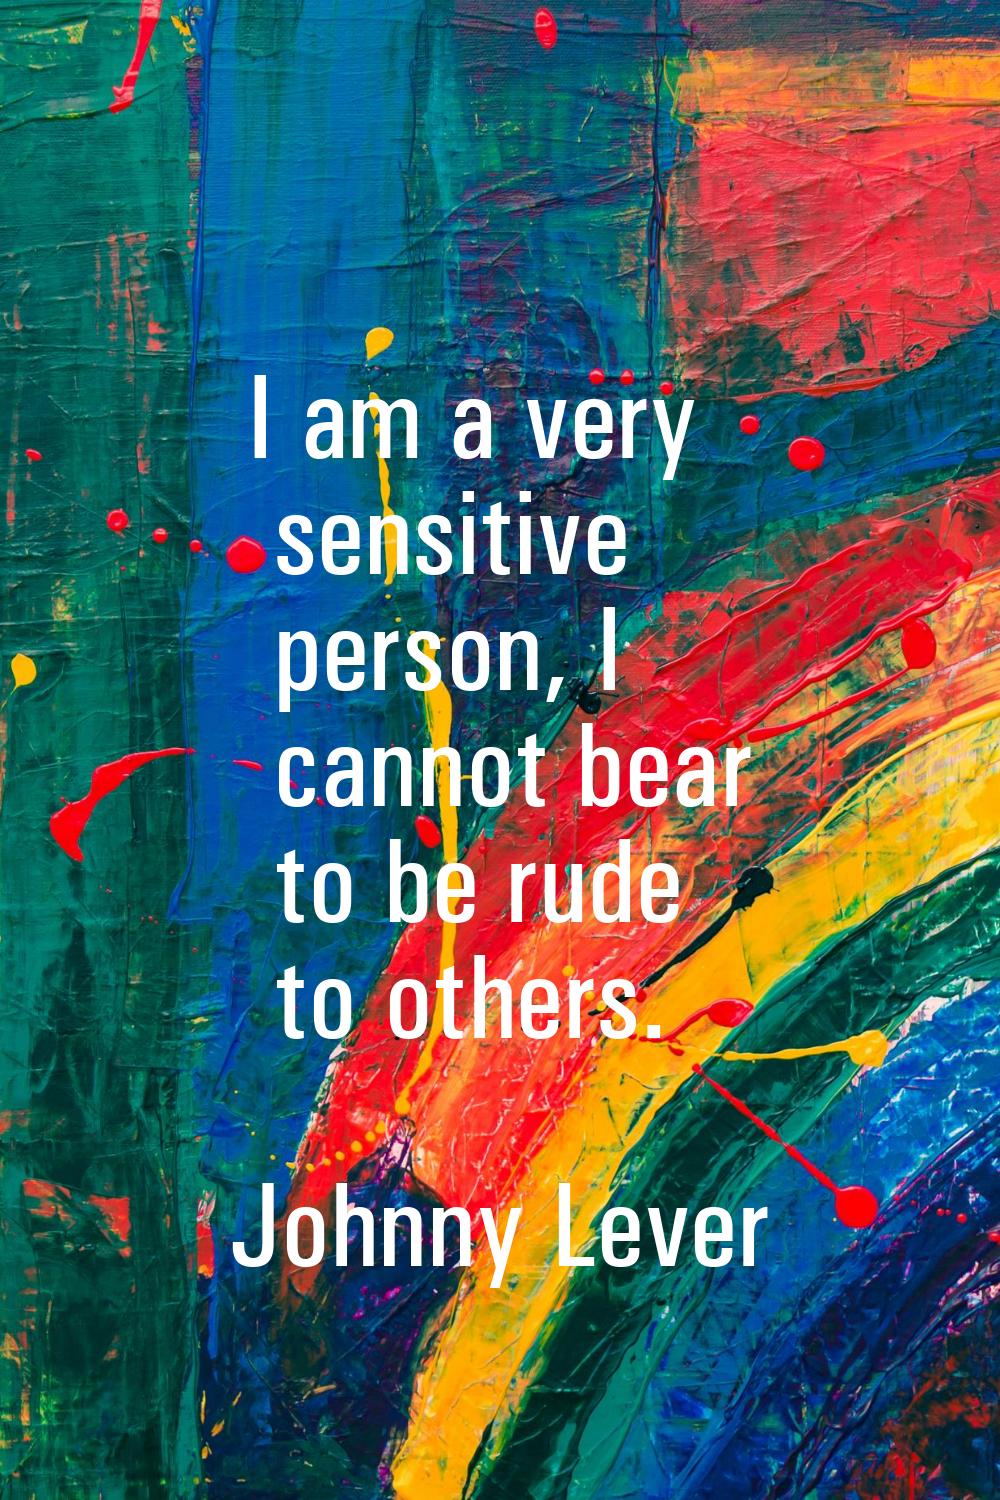 I am a very sensitive person, I cannot bear to be rude to others.